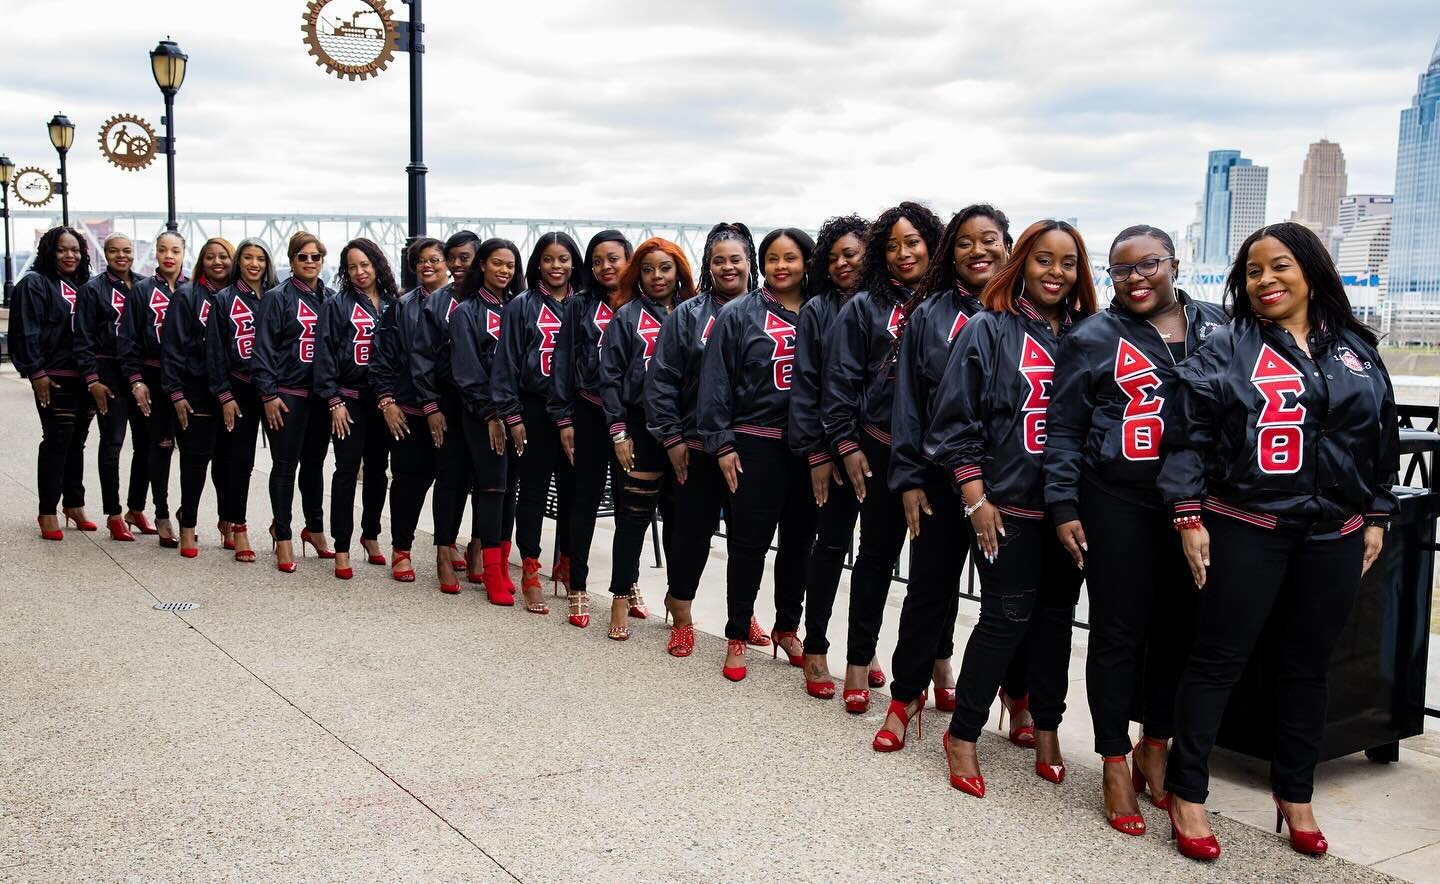 Happy 5th Deltaversary to our sorors of S.Q.U.A.D. 27! March 23, 2019. Five years down&hellip;a lifetime of scholarship, sisterhood, service and social action ahead. Oh to be a Delta girl! 🙌🏾&hearts;️

#CQCA #CQCADST #cqcadeltas #deltaversary #sinc